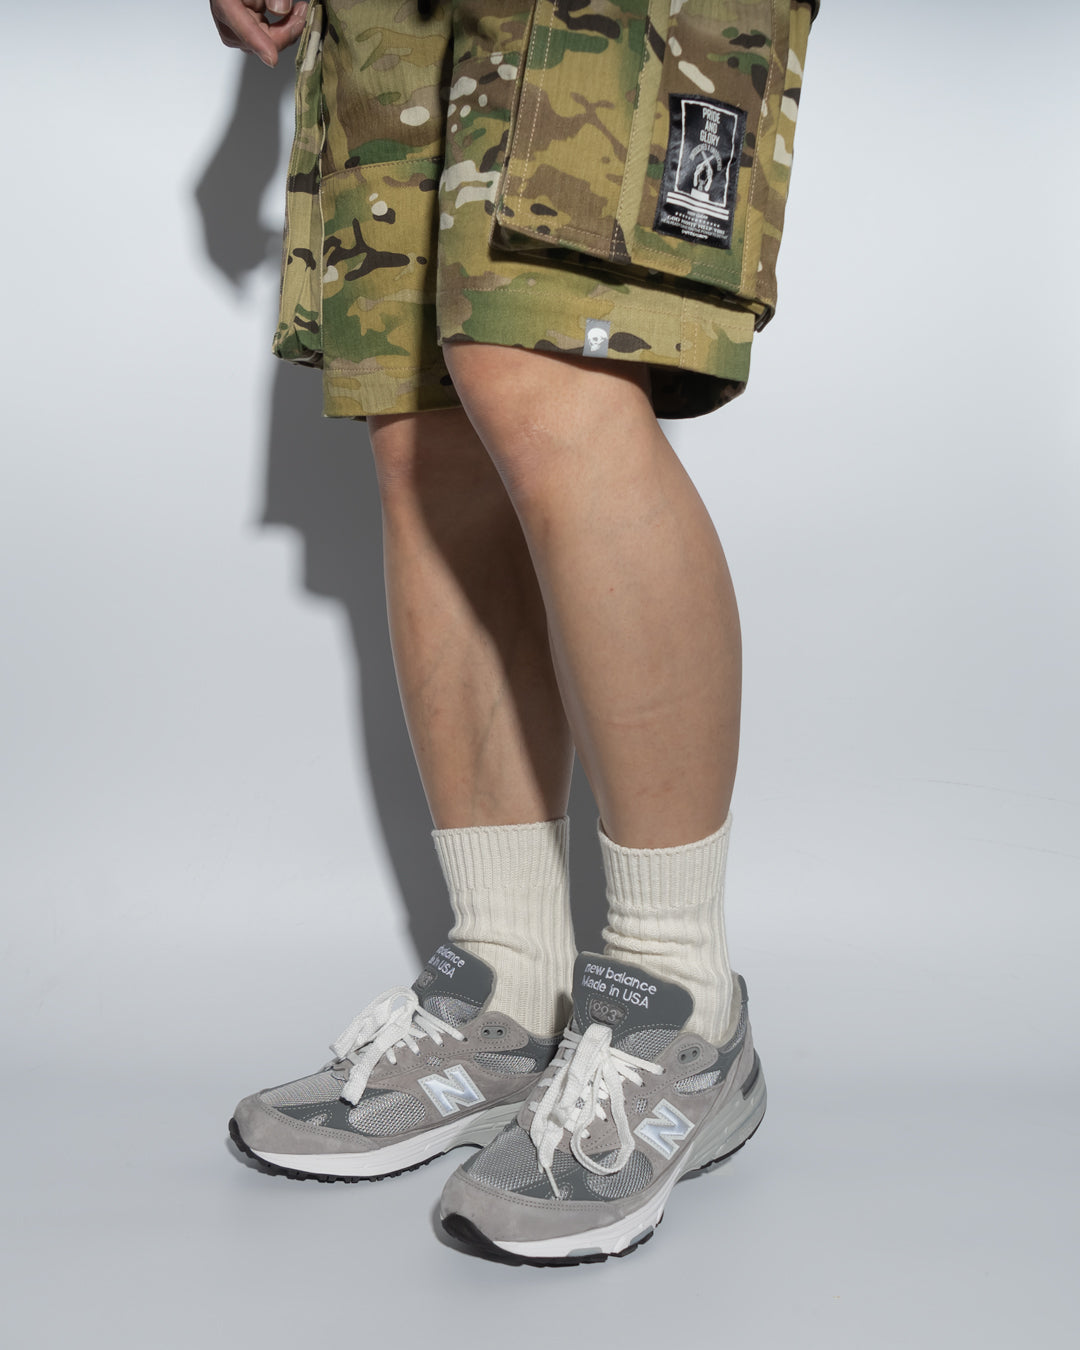 SG00MC | DOUBLE FIRE ARMY SHORTS-SHORTS-UNTOUCHED UNITED